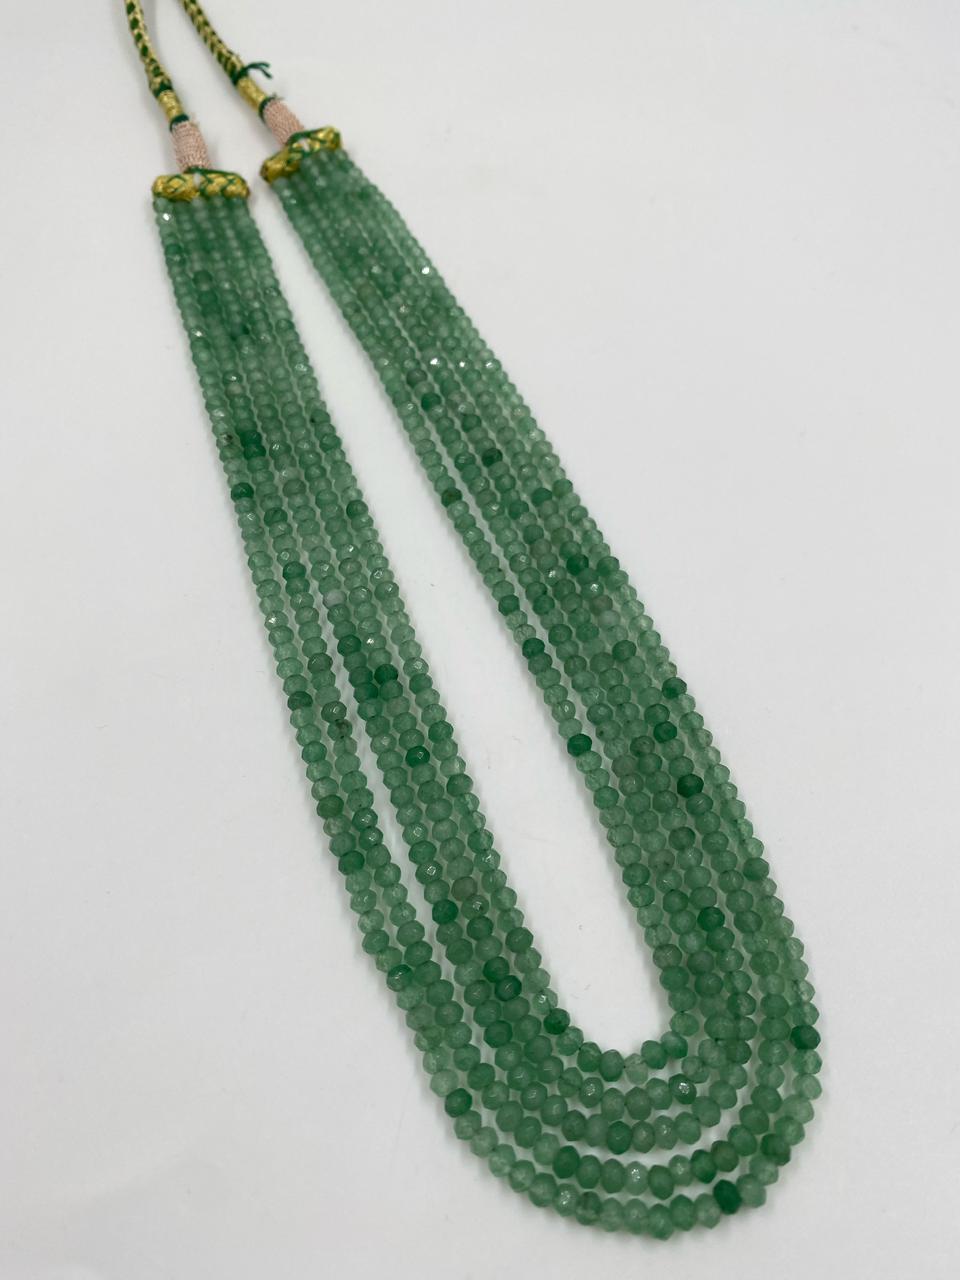 Multilayered Semi Precious Mint Green Jade Beads Necklace By Gehna Shop Beads Jewellery